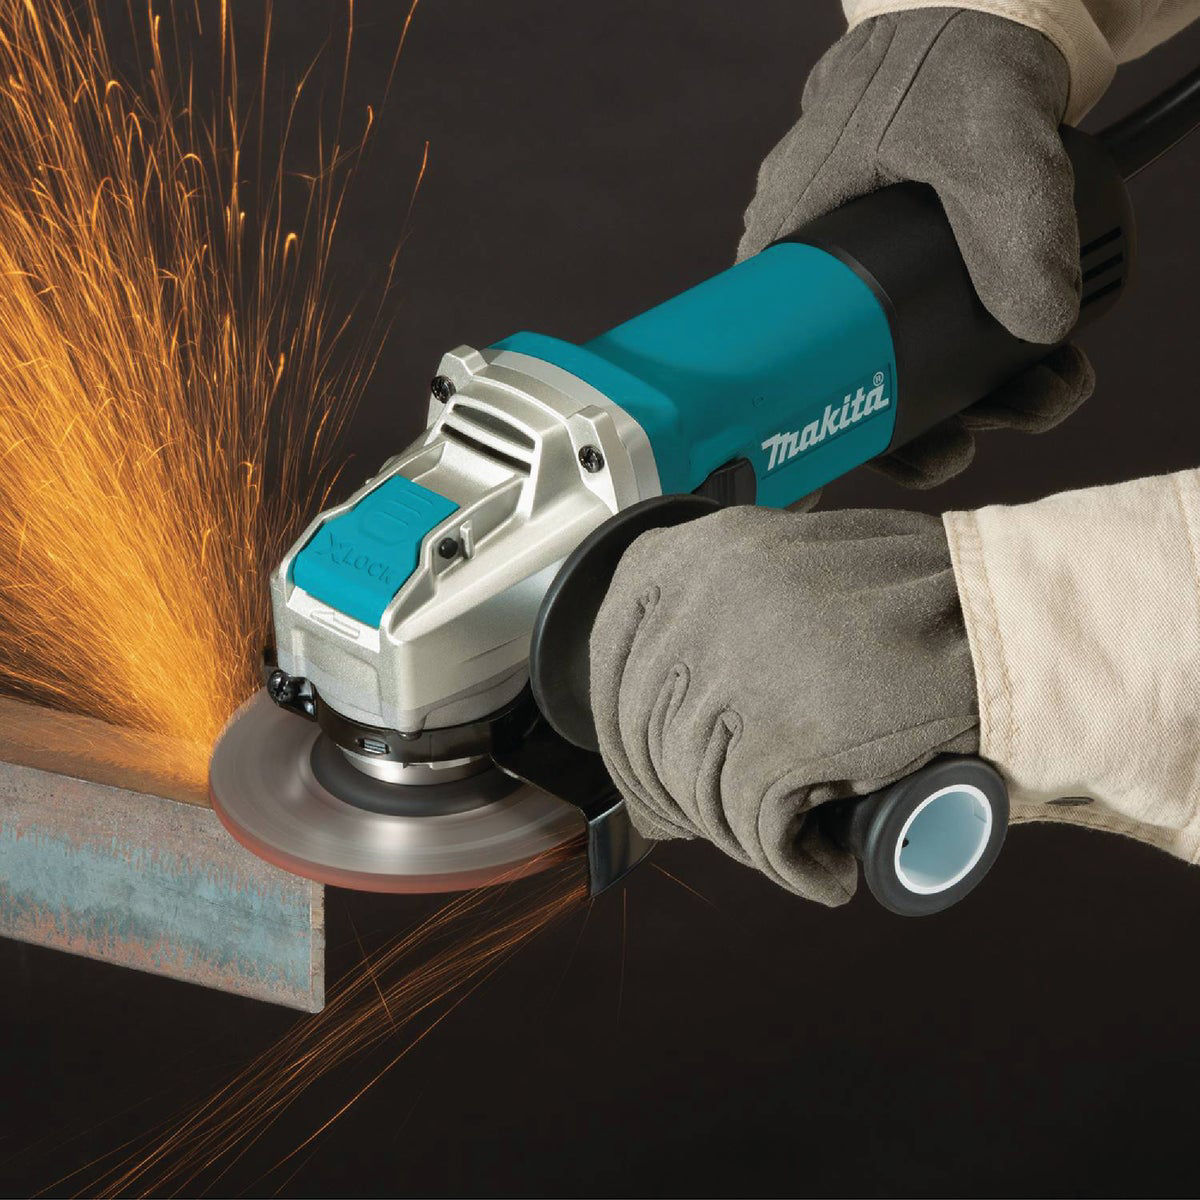 Makita 4-1/2 In. 7.5-Amp X-LOCK Angle Grinder with Lock On